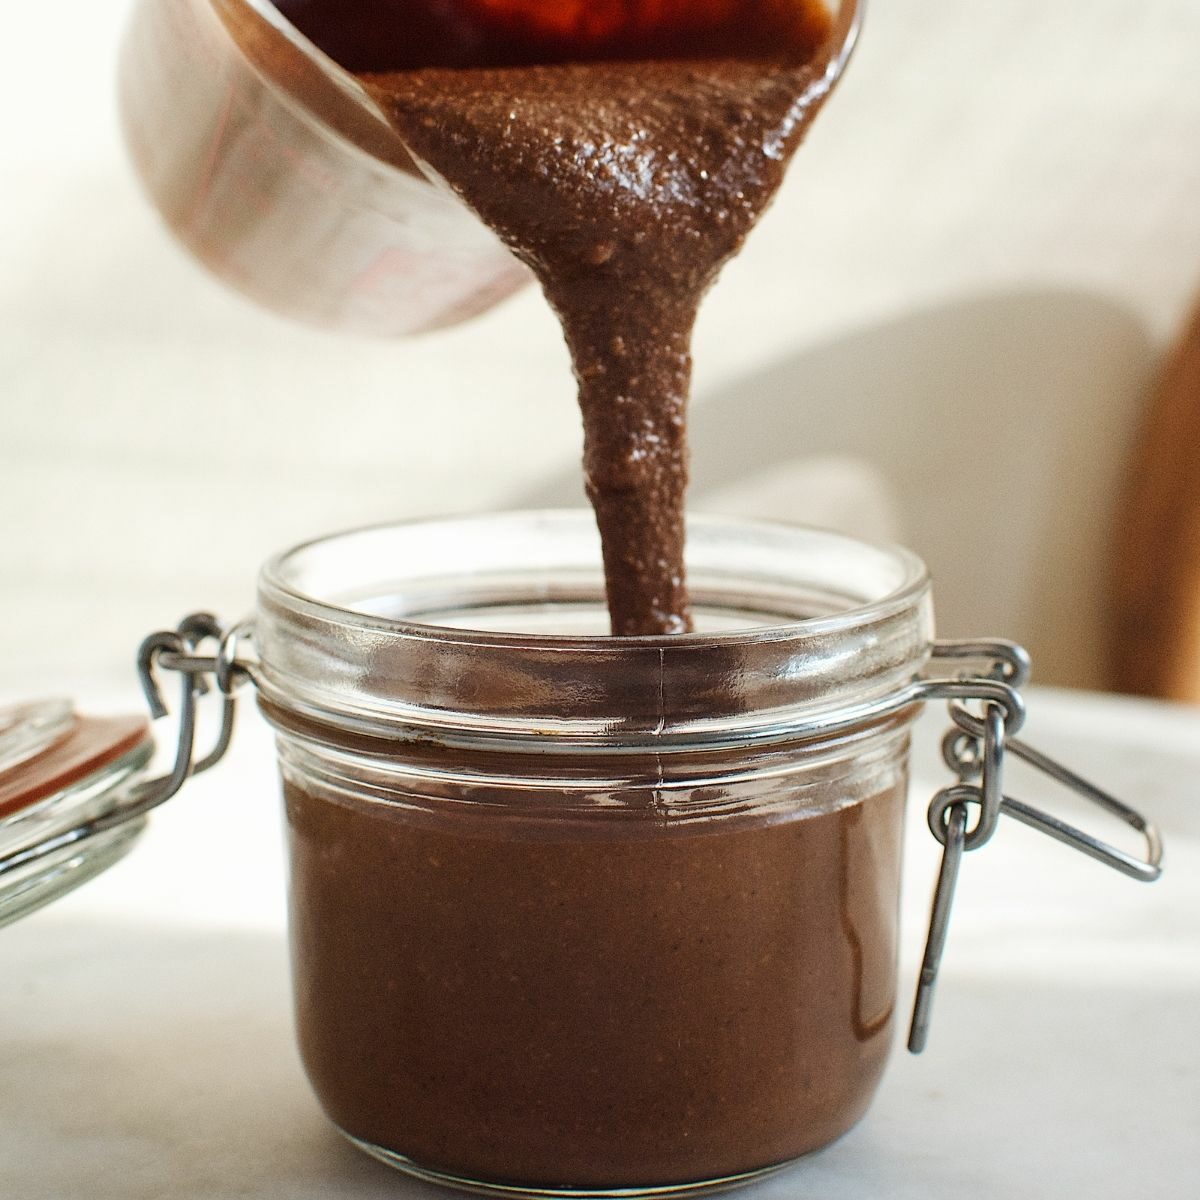 Gianduja being poured in a jar.